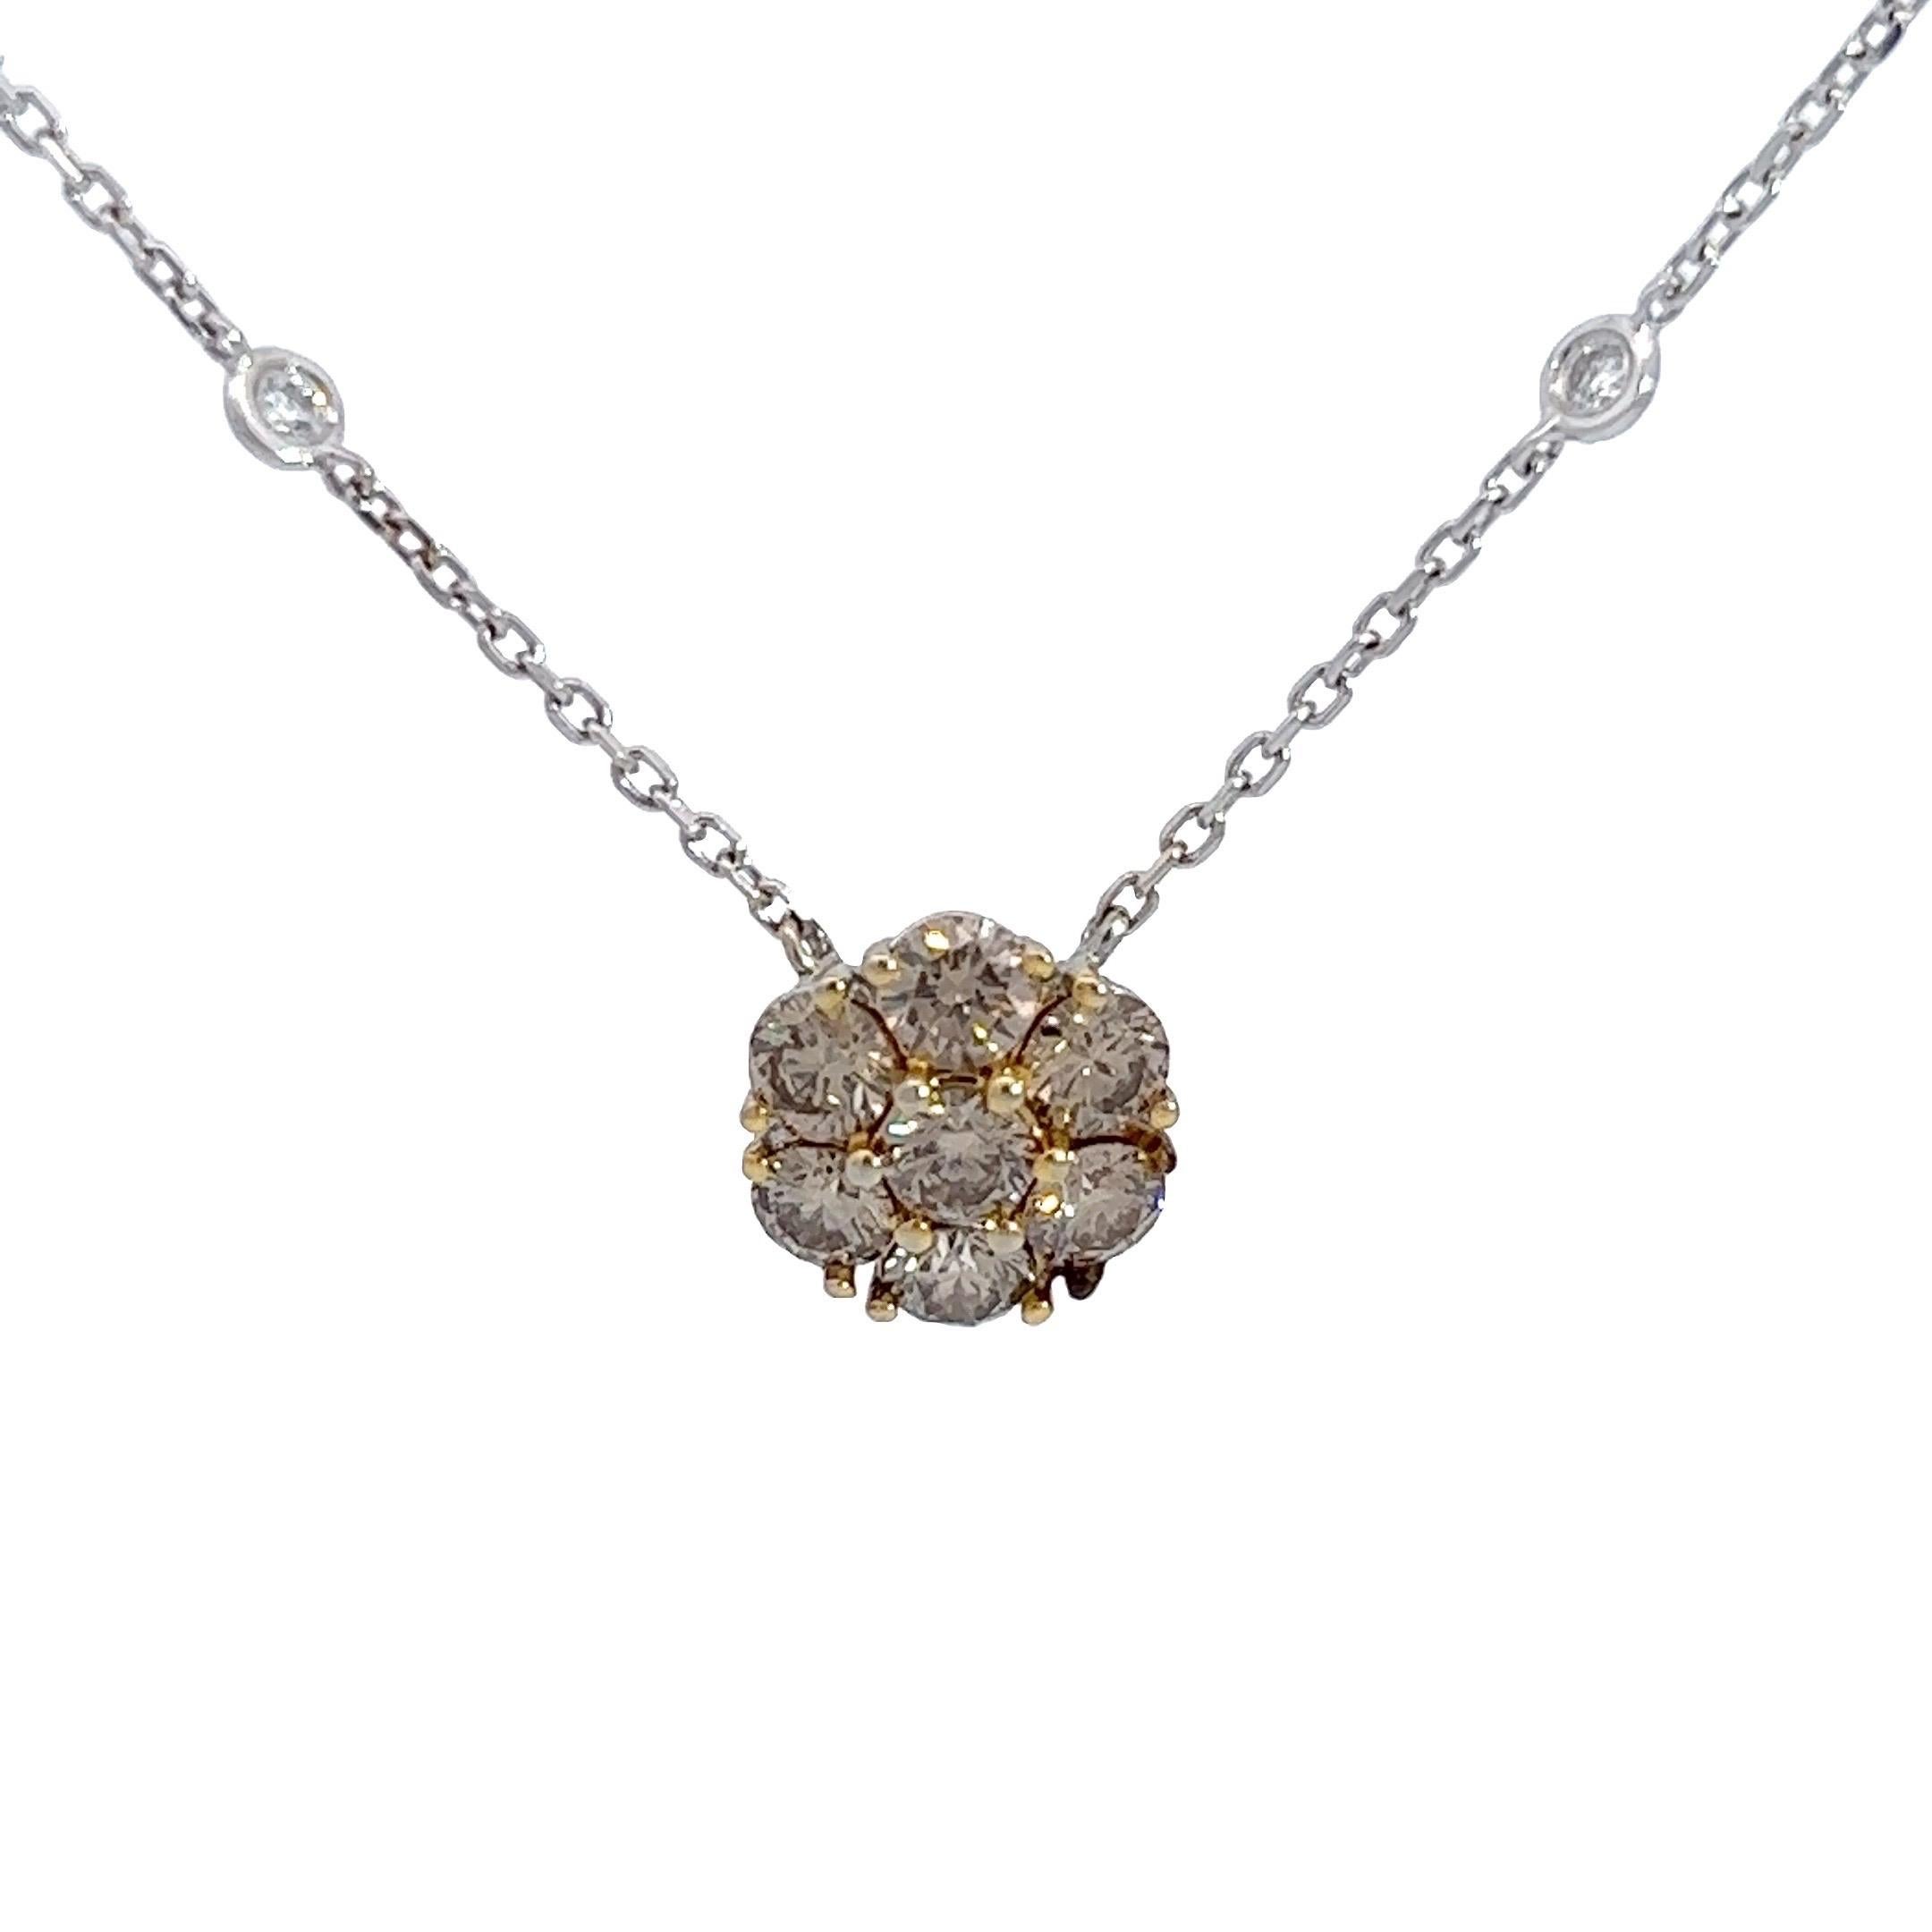 Adorn yourself with sheer radiance through this enchanting pendant featuring Champagne Natural Full Brilliant Cut Diamonds. Set in 14k white gold with dazzling yellow prongs, the pendant exudes a unique and luxurious contrast that captivates the